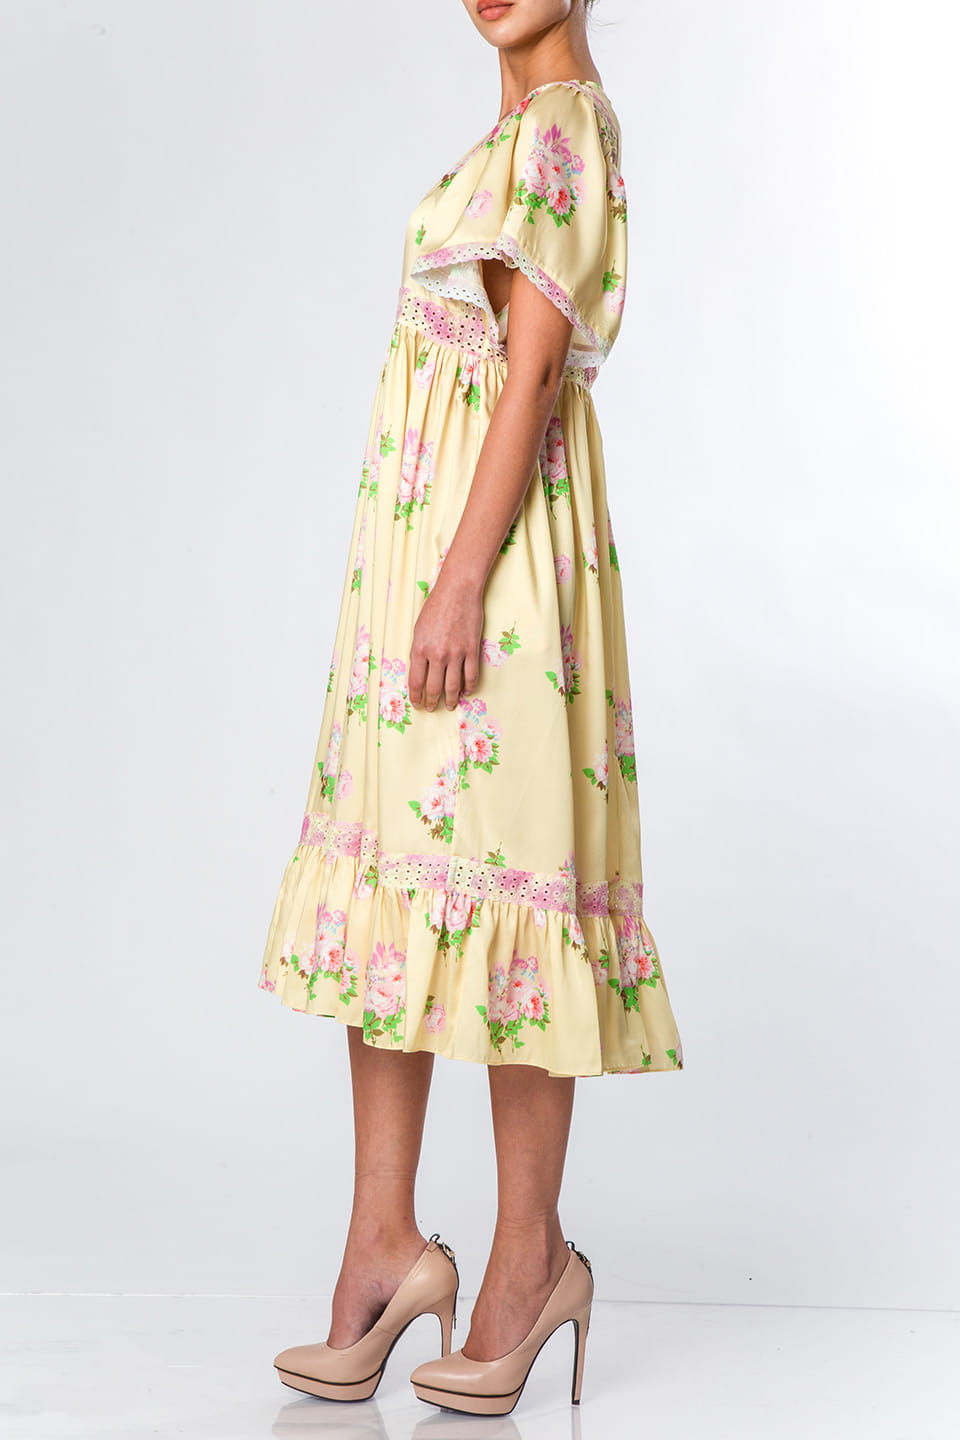 Thumbnail for Product gallery 4, Manoush blossom long dress side